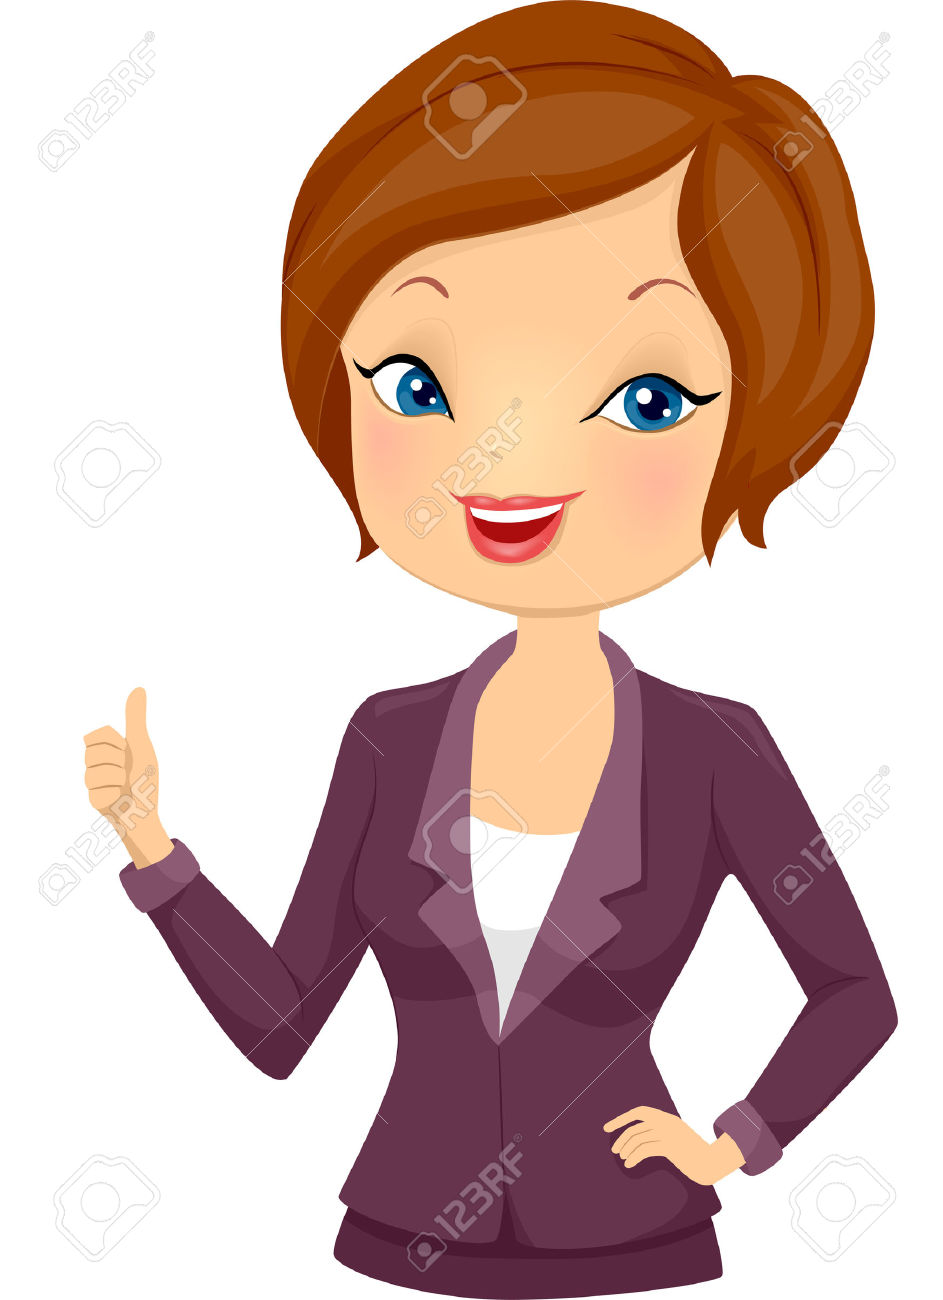 Girl Thumbs Up Clipart.